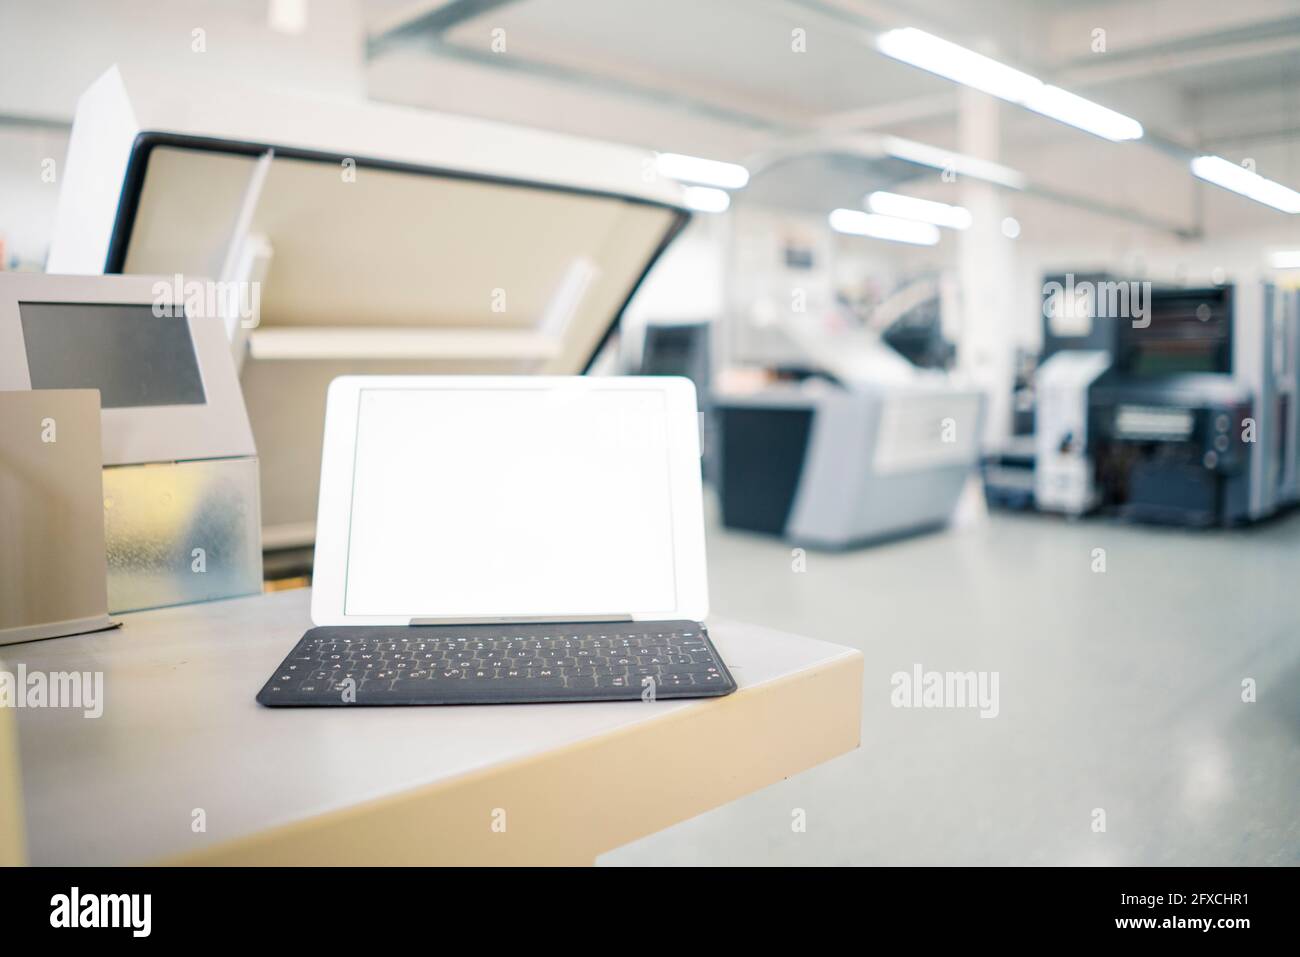 Digital tablet on table with printing press in factory Stock Photo